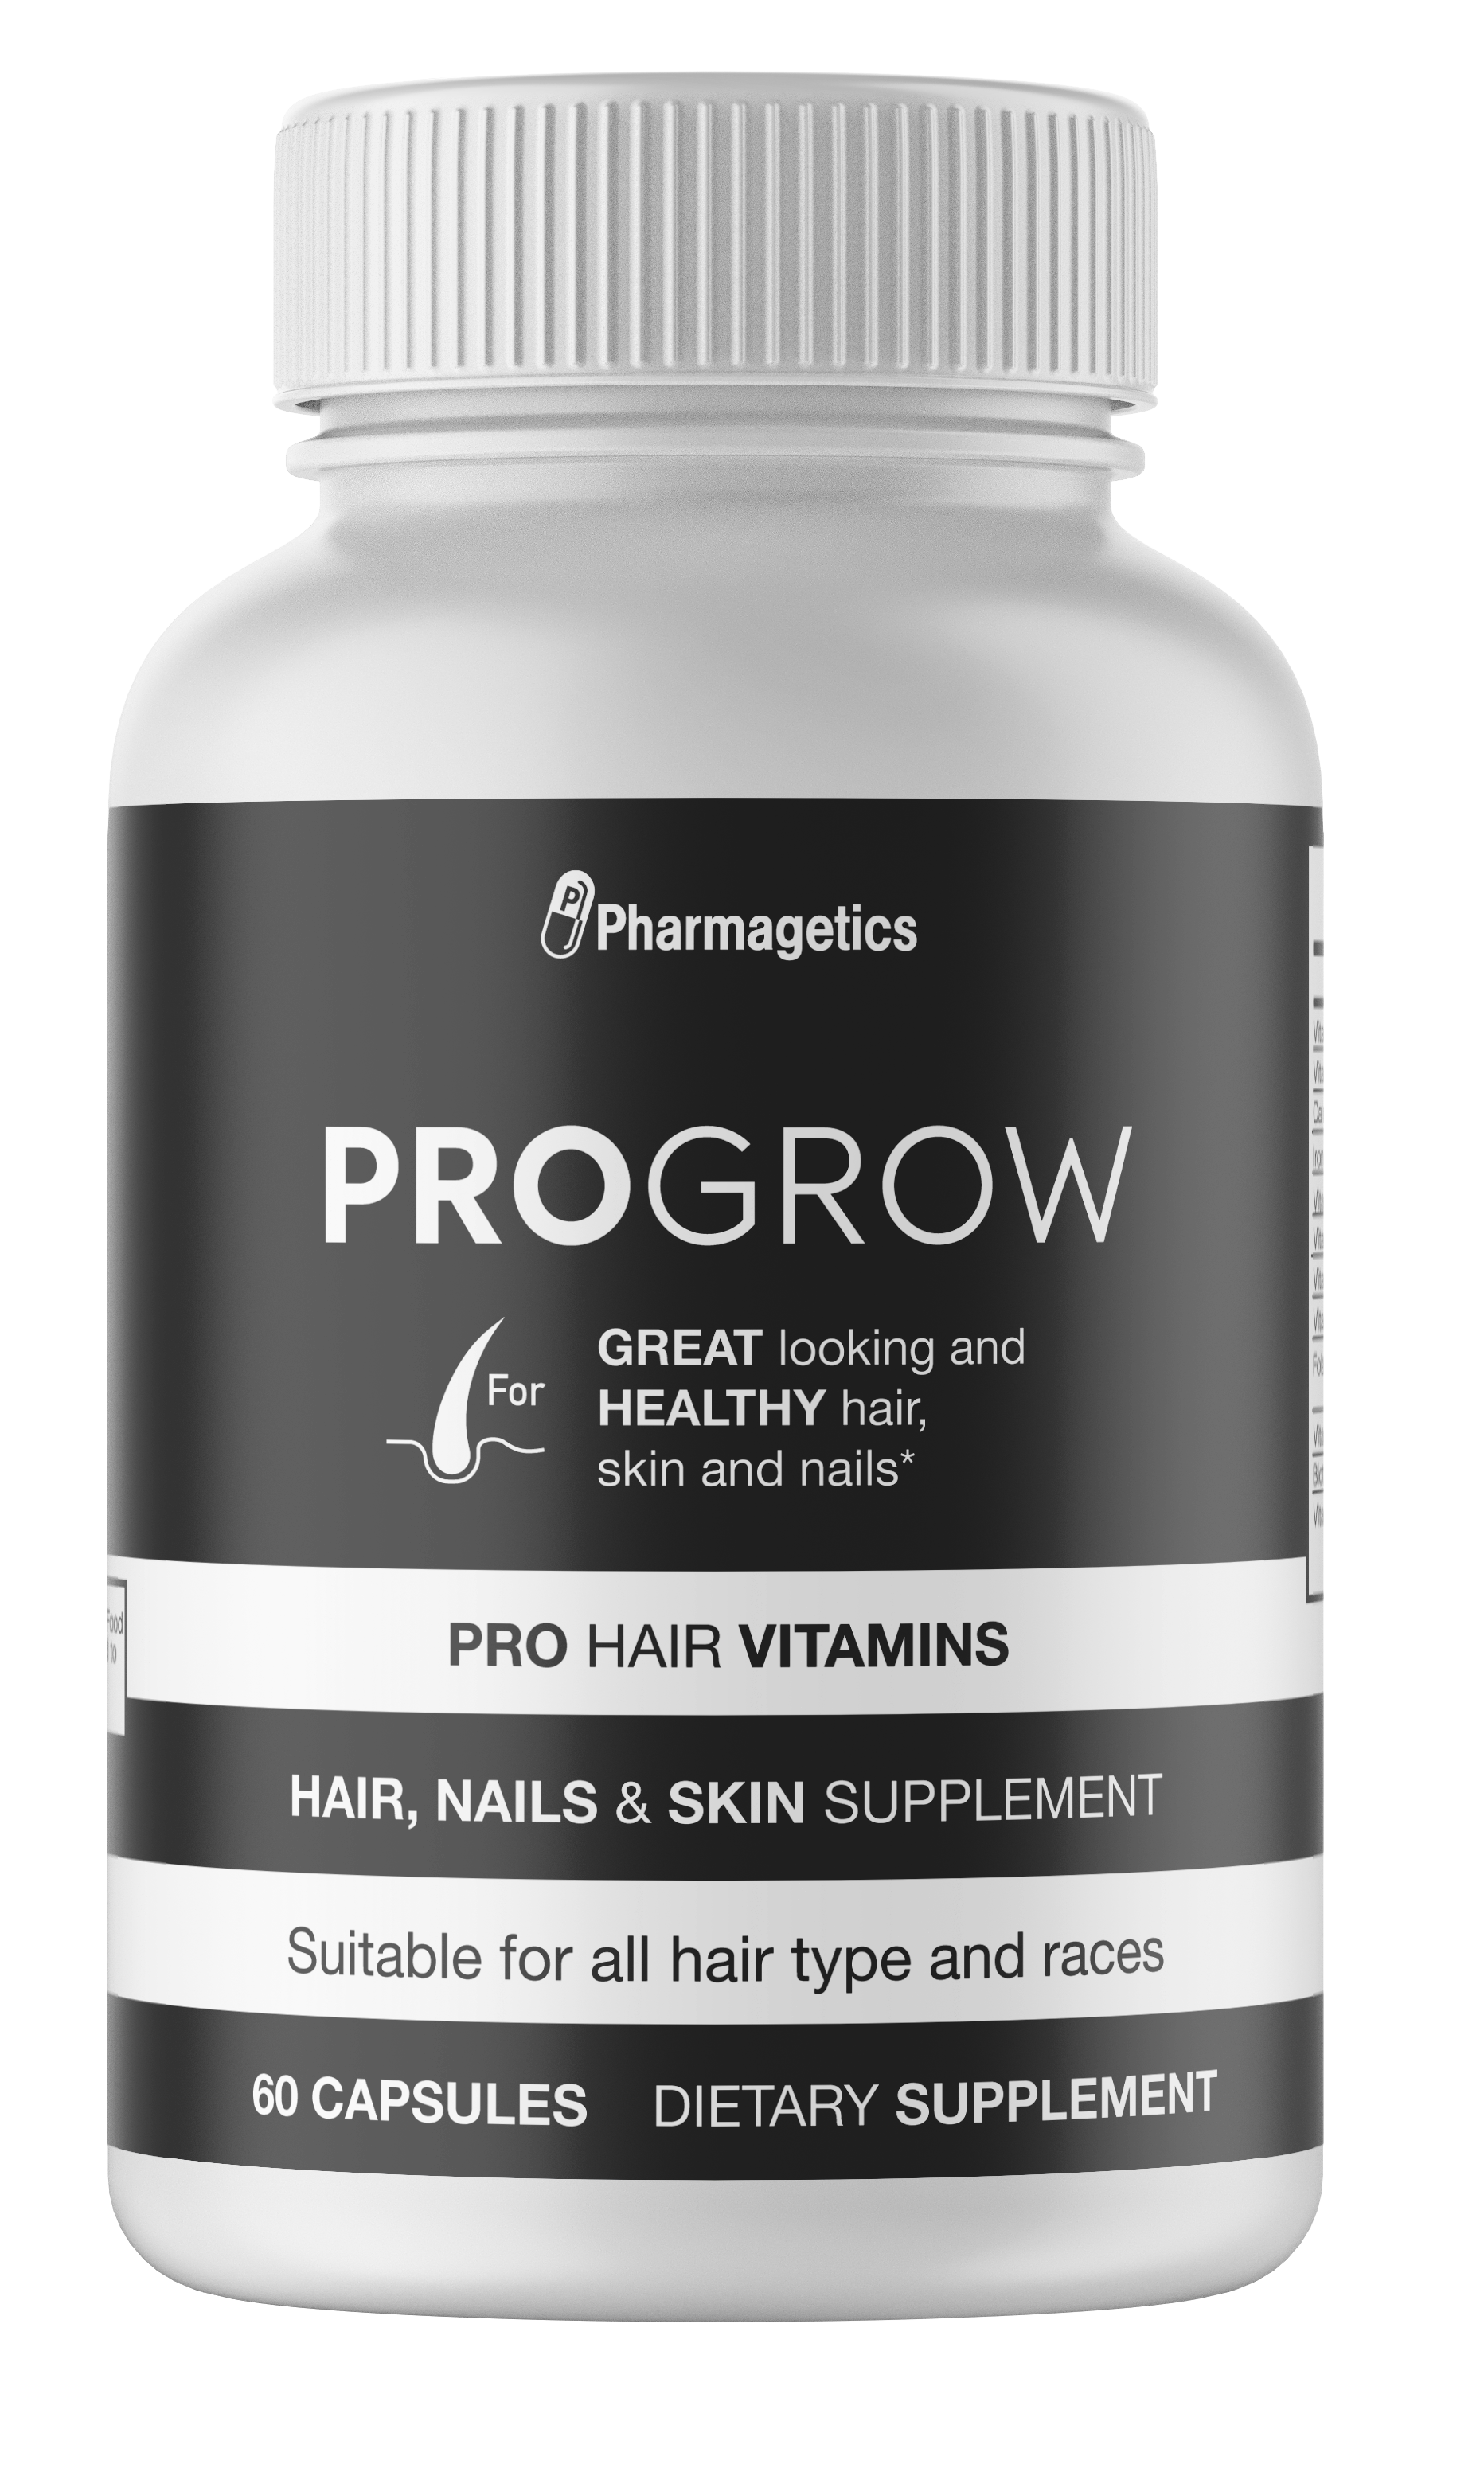 2 Bottles PROGROW for Great Looking and Healthy Hair Skin and Nails 60 Capsules